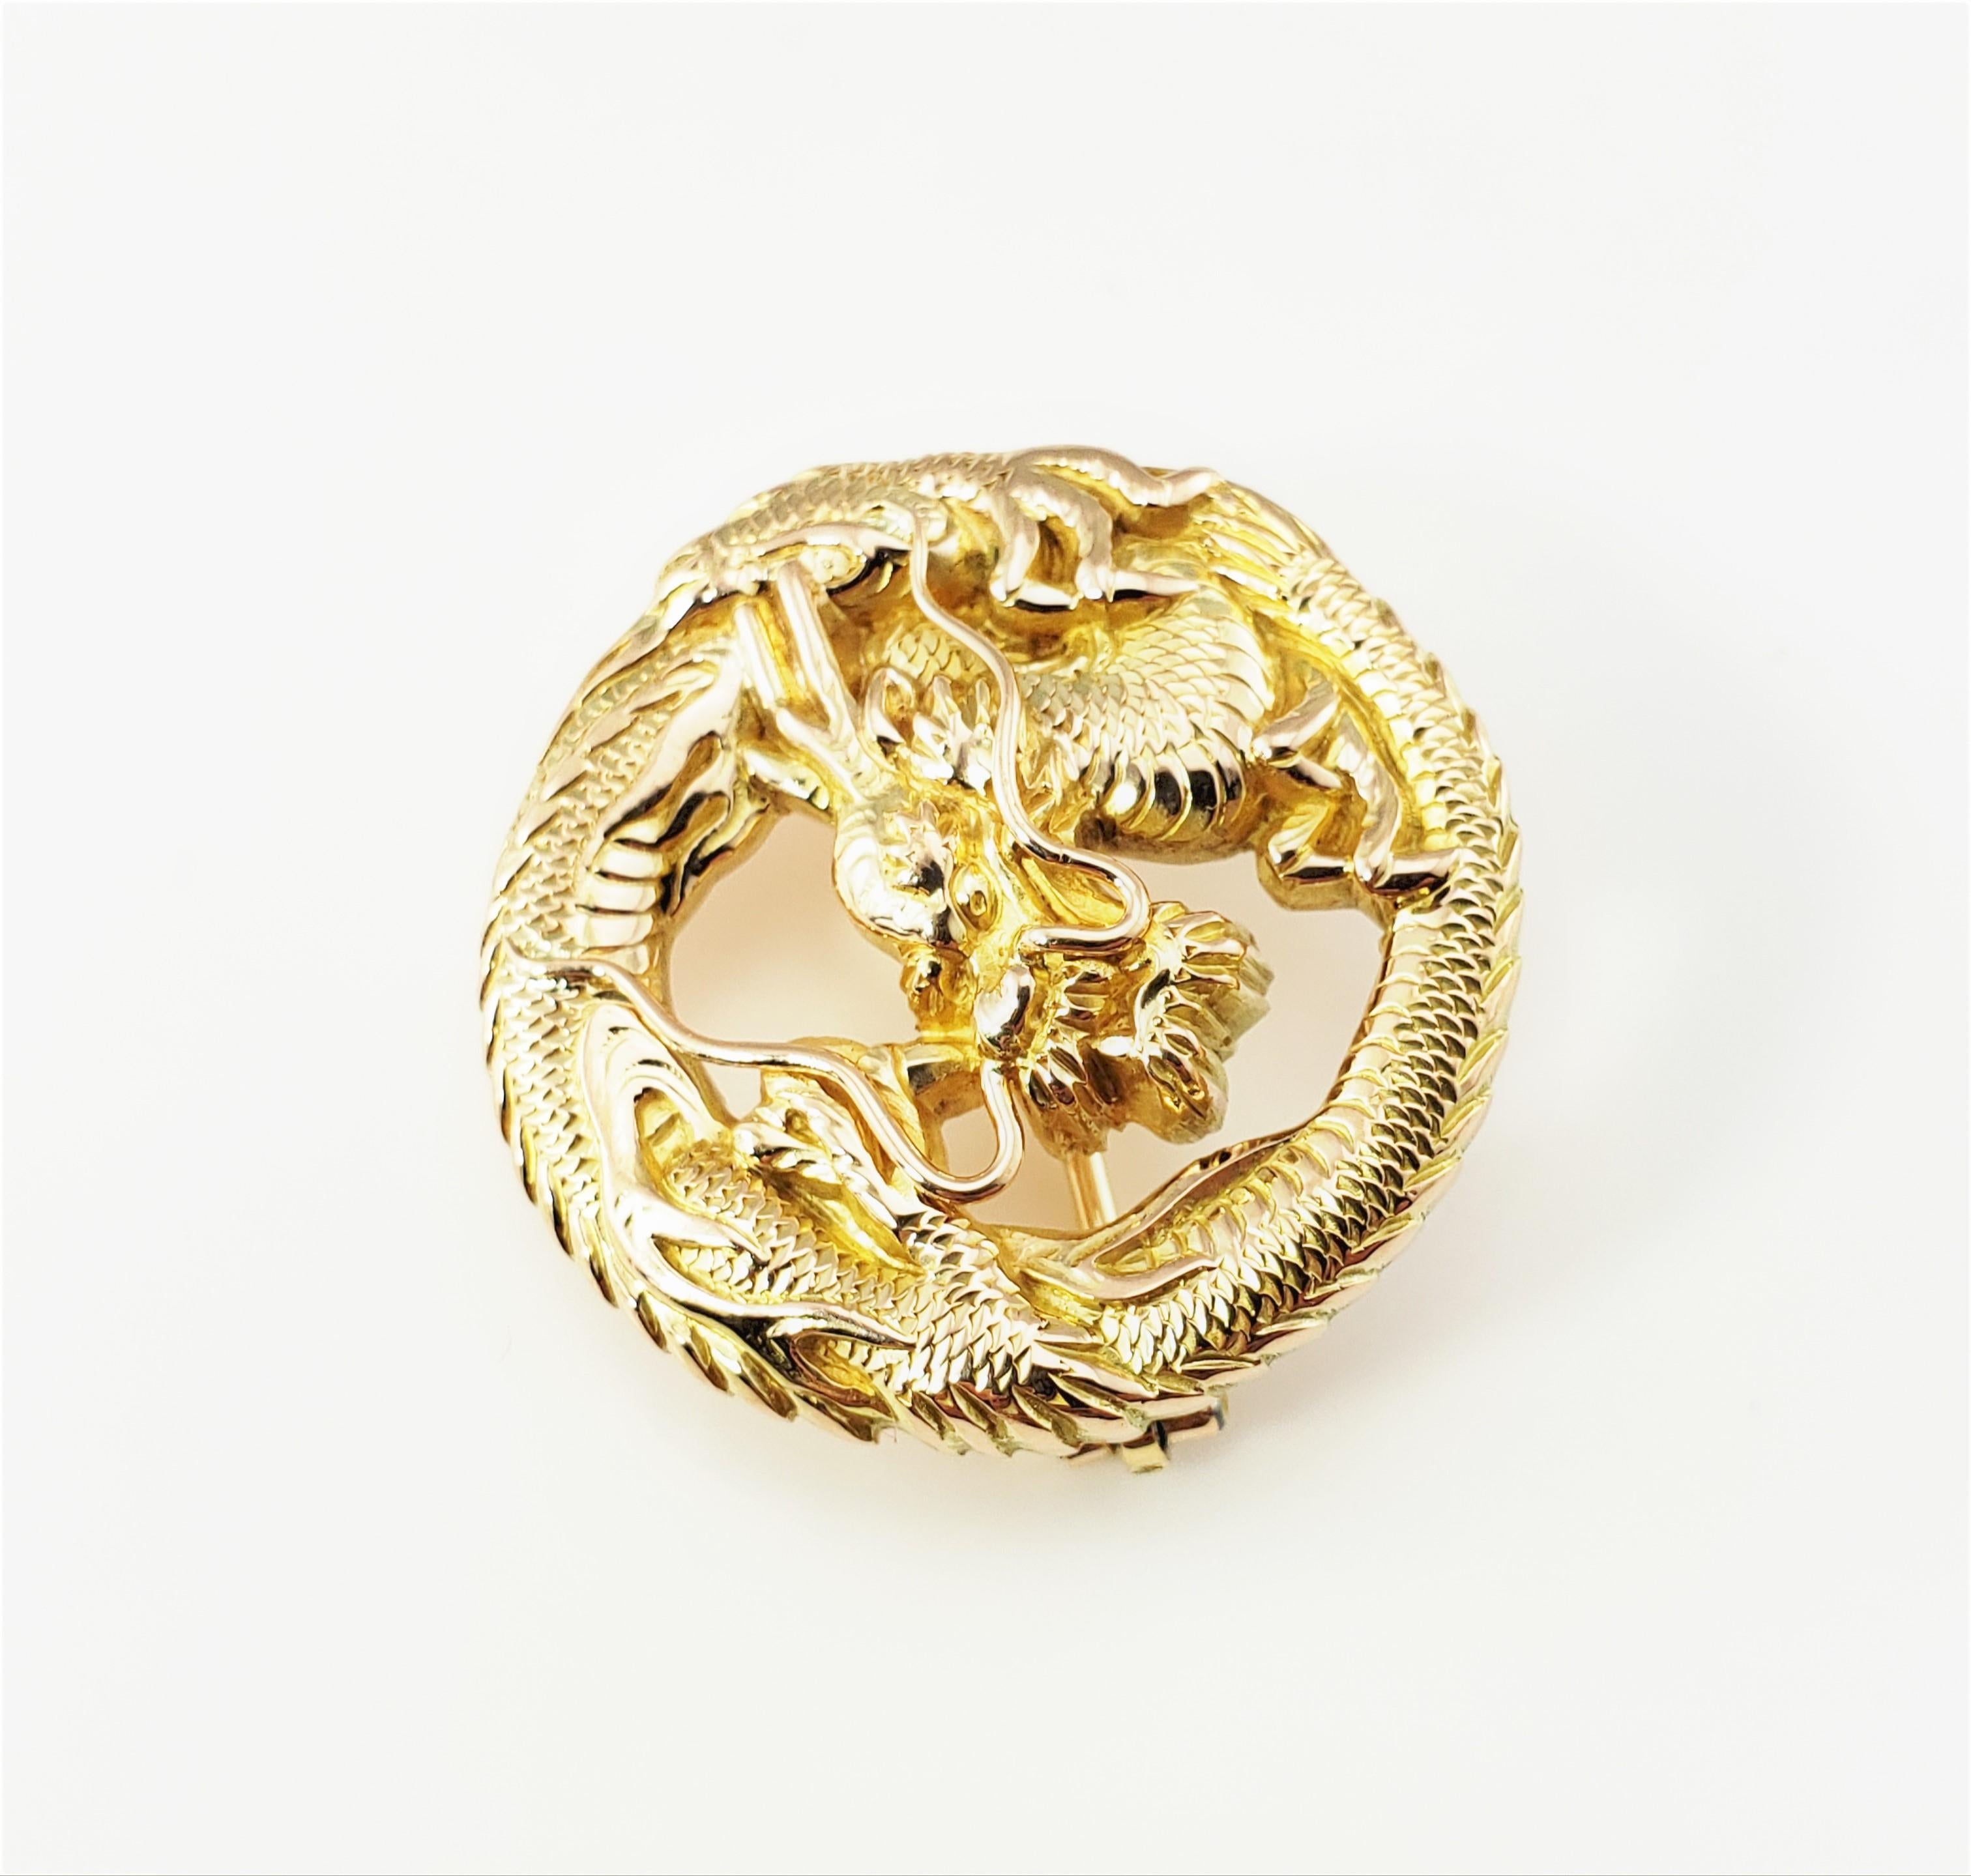 14 Karat Yellow Gold Dragon Brooch/Pin-

This lovely brooch features a beautifully detailed dragon crafted in classic 14K yellow gold.

Size:  27 mm x  27 mm 

Weight:  6.1 dwt. /  9.5 gr.

Tested for 14K gold.

Very good condition, professionally